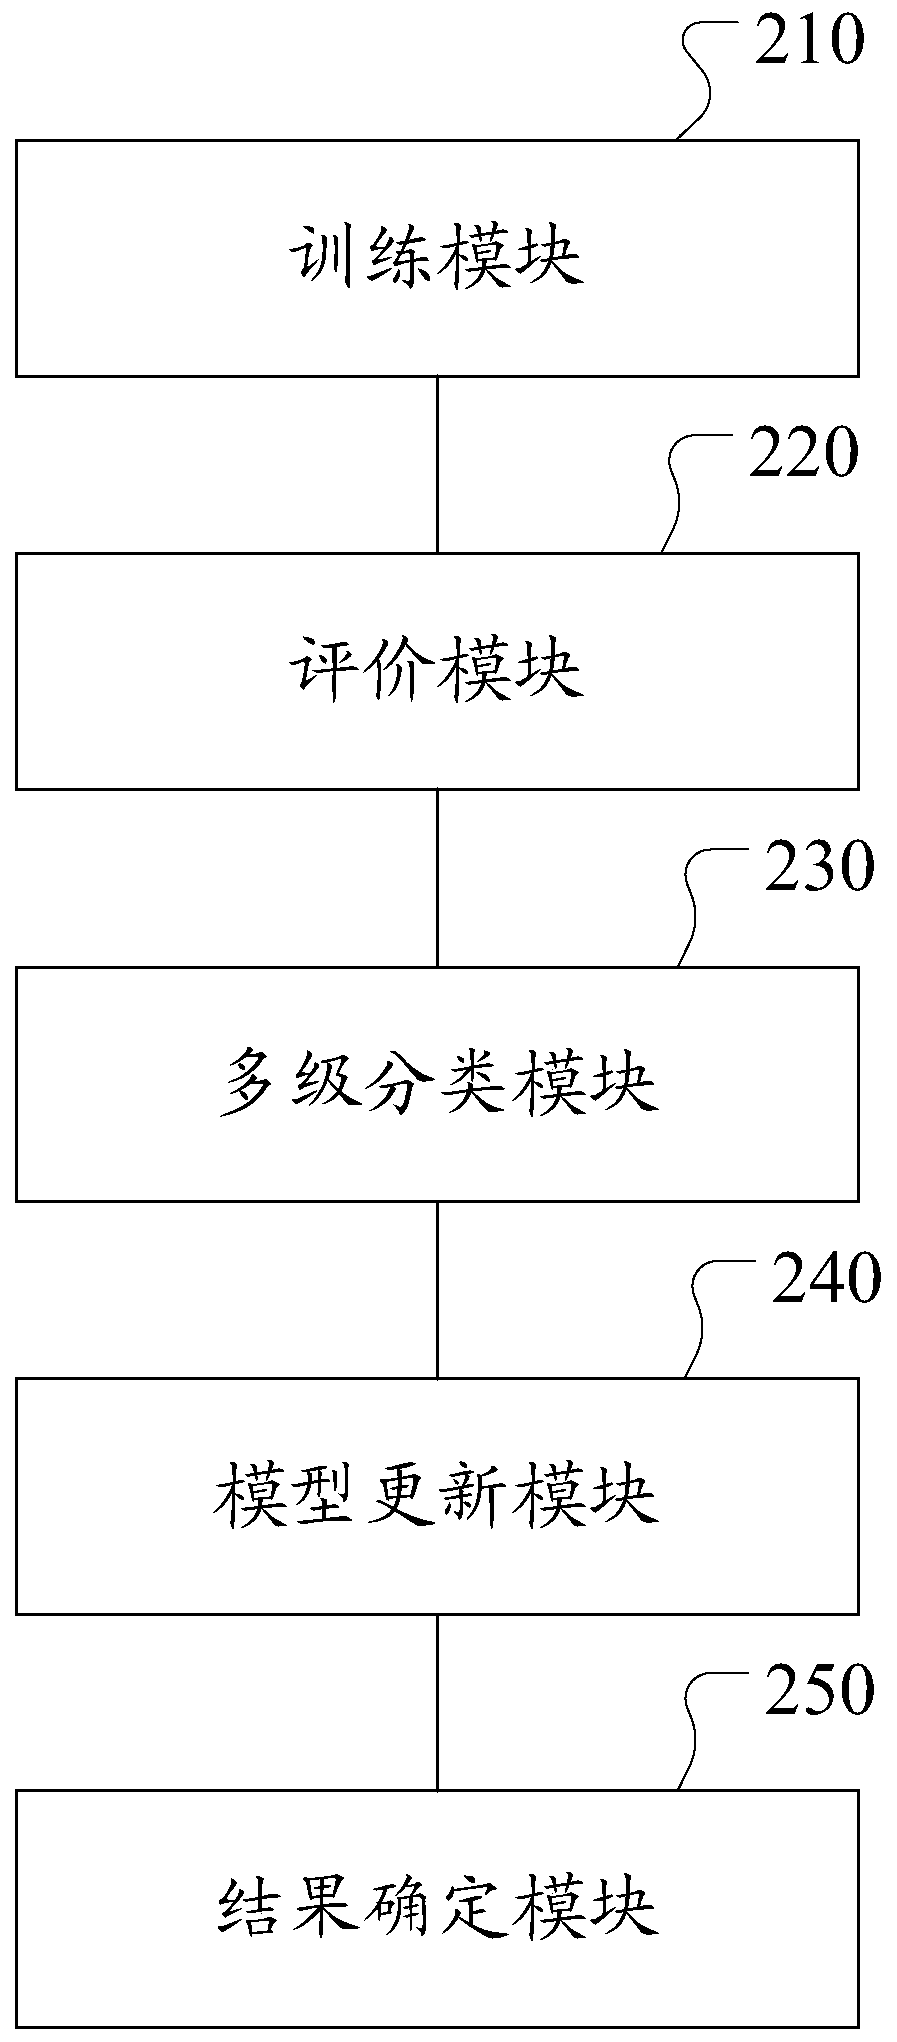 A multi-level classification system and method based on news text information